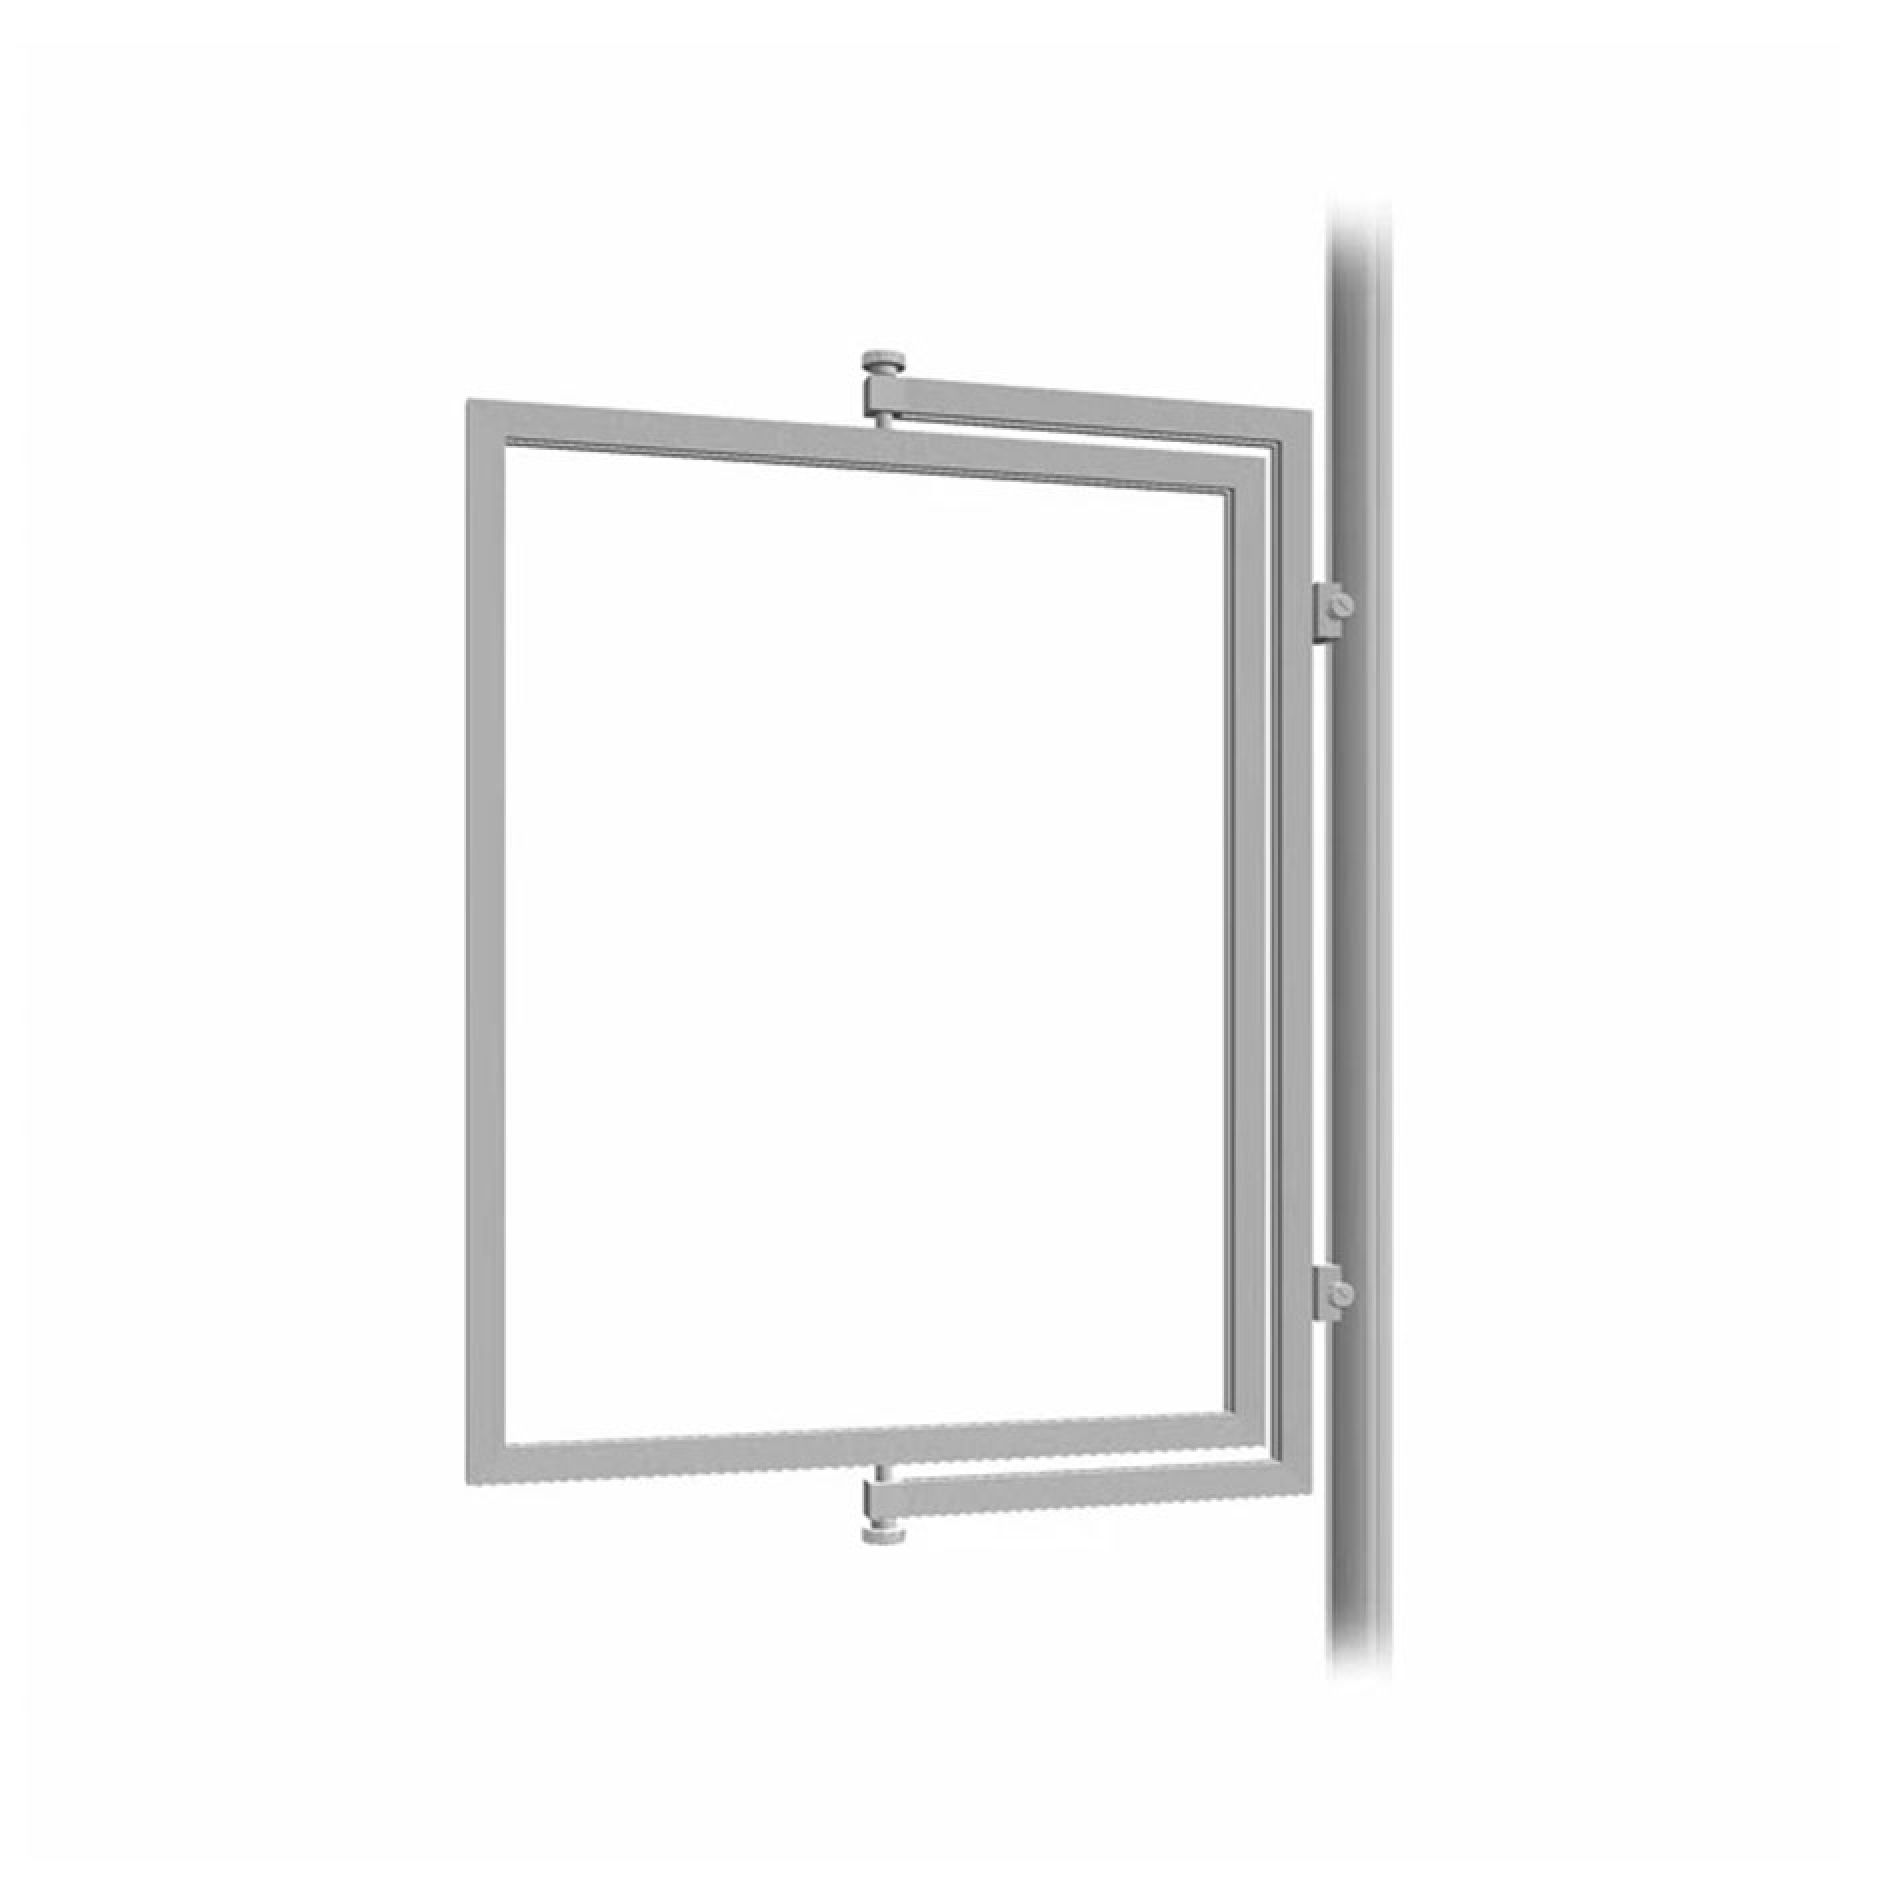 Wall bracket with rod Gallery Image